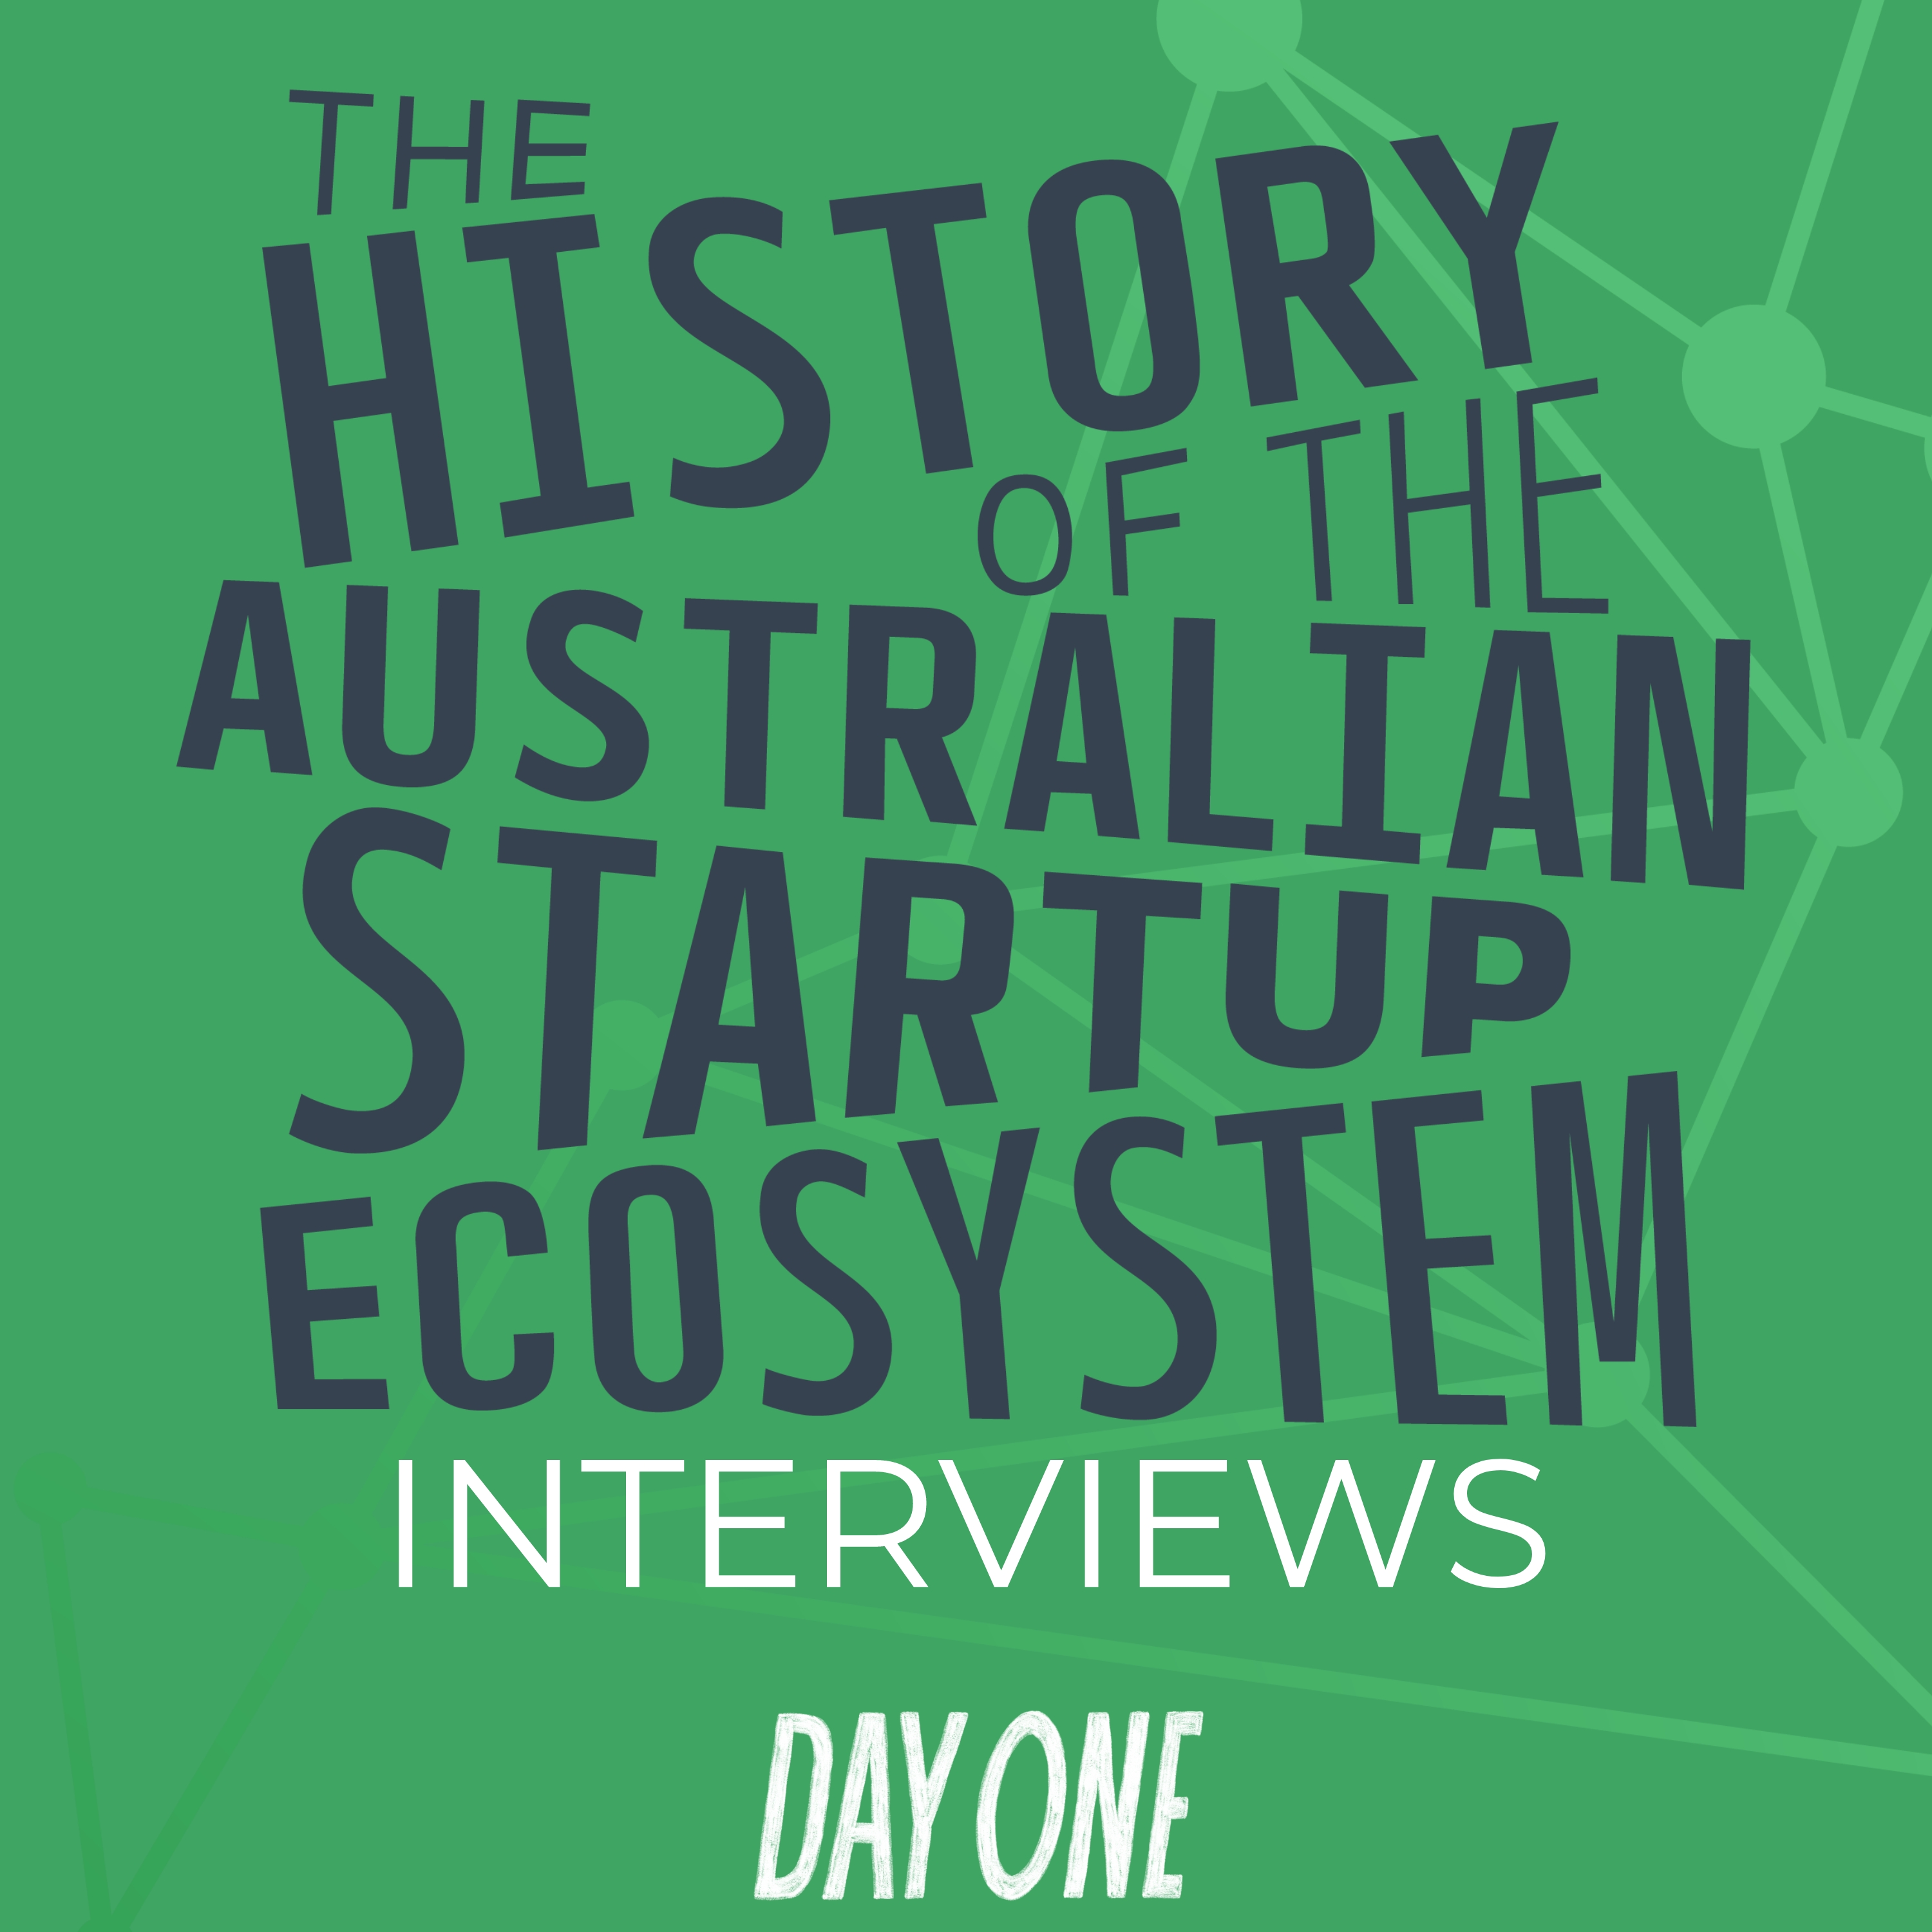 Alex Carpenter sees Australia’s startup ecosystem as radically more collaborative than corporate settings